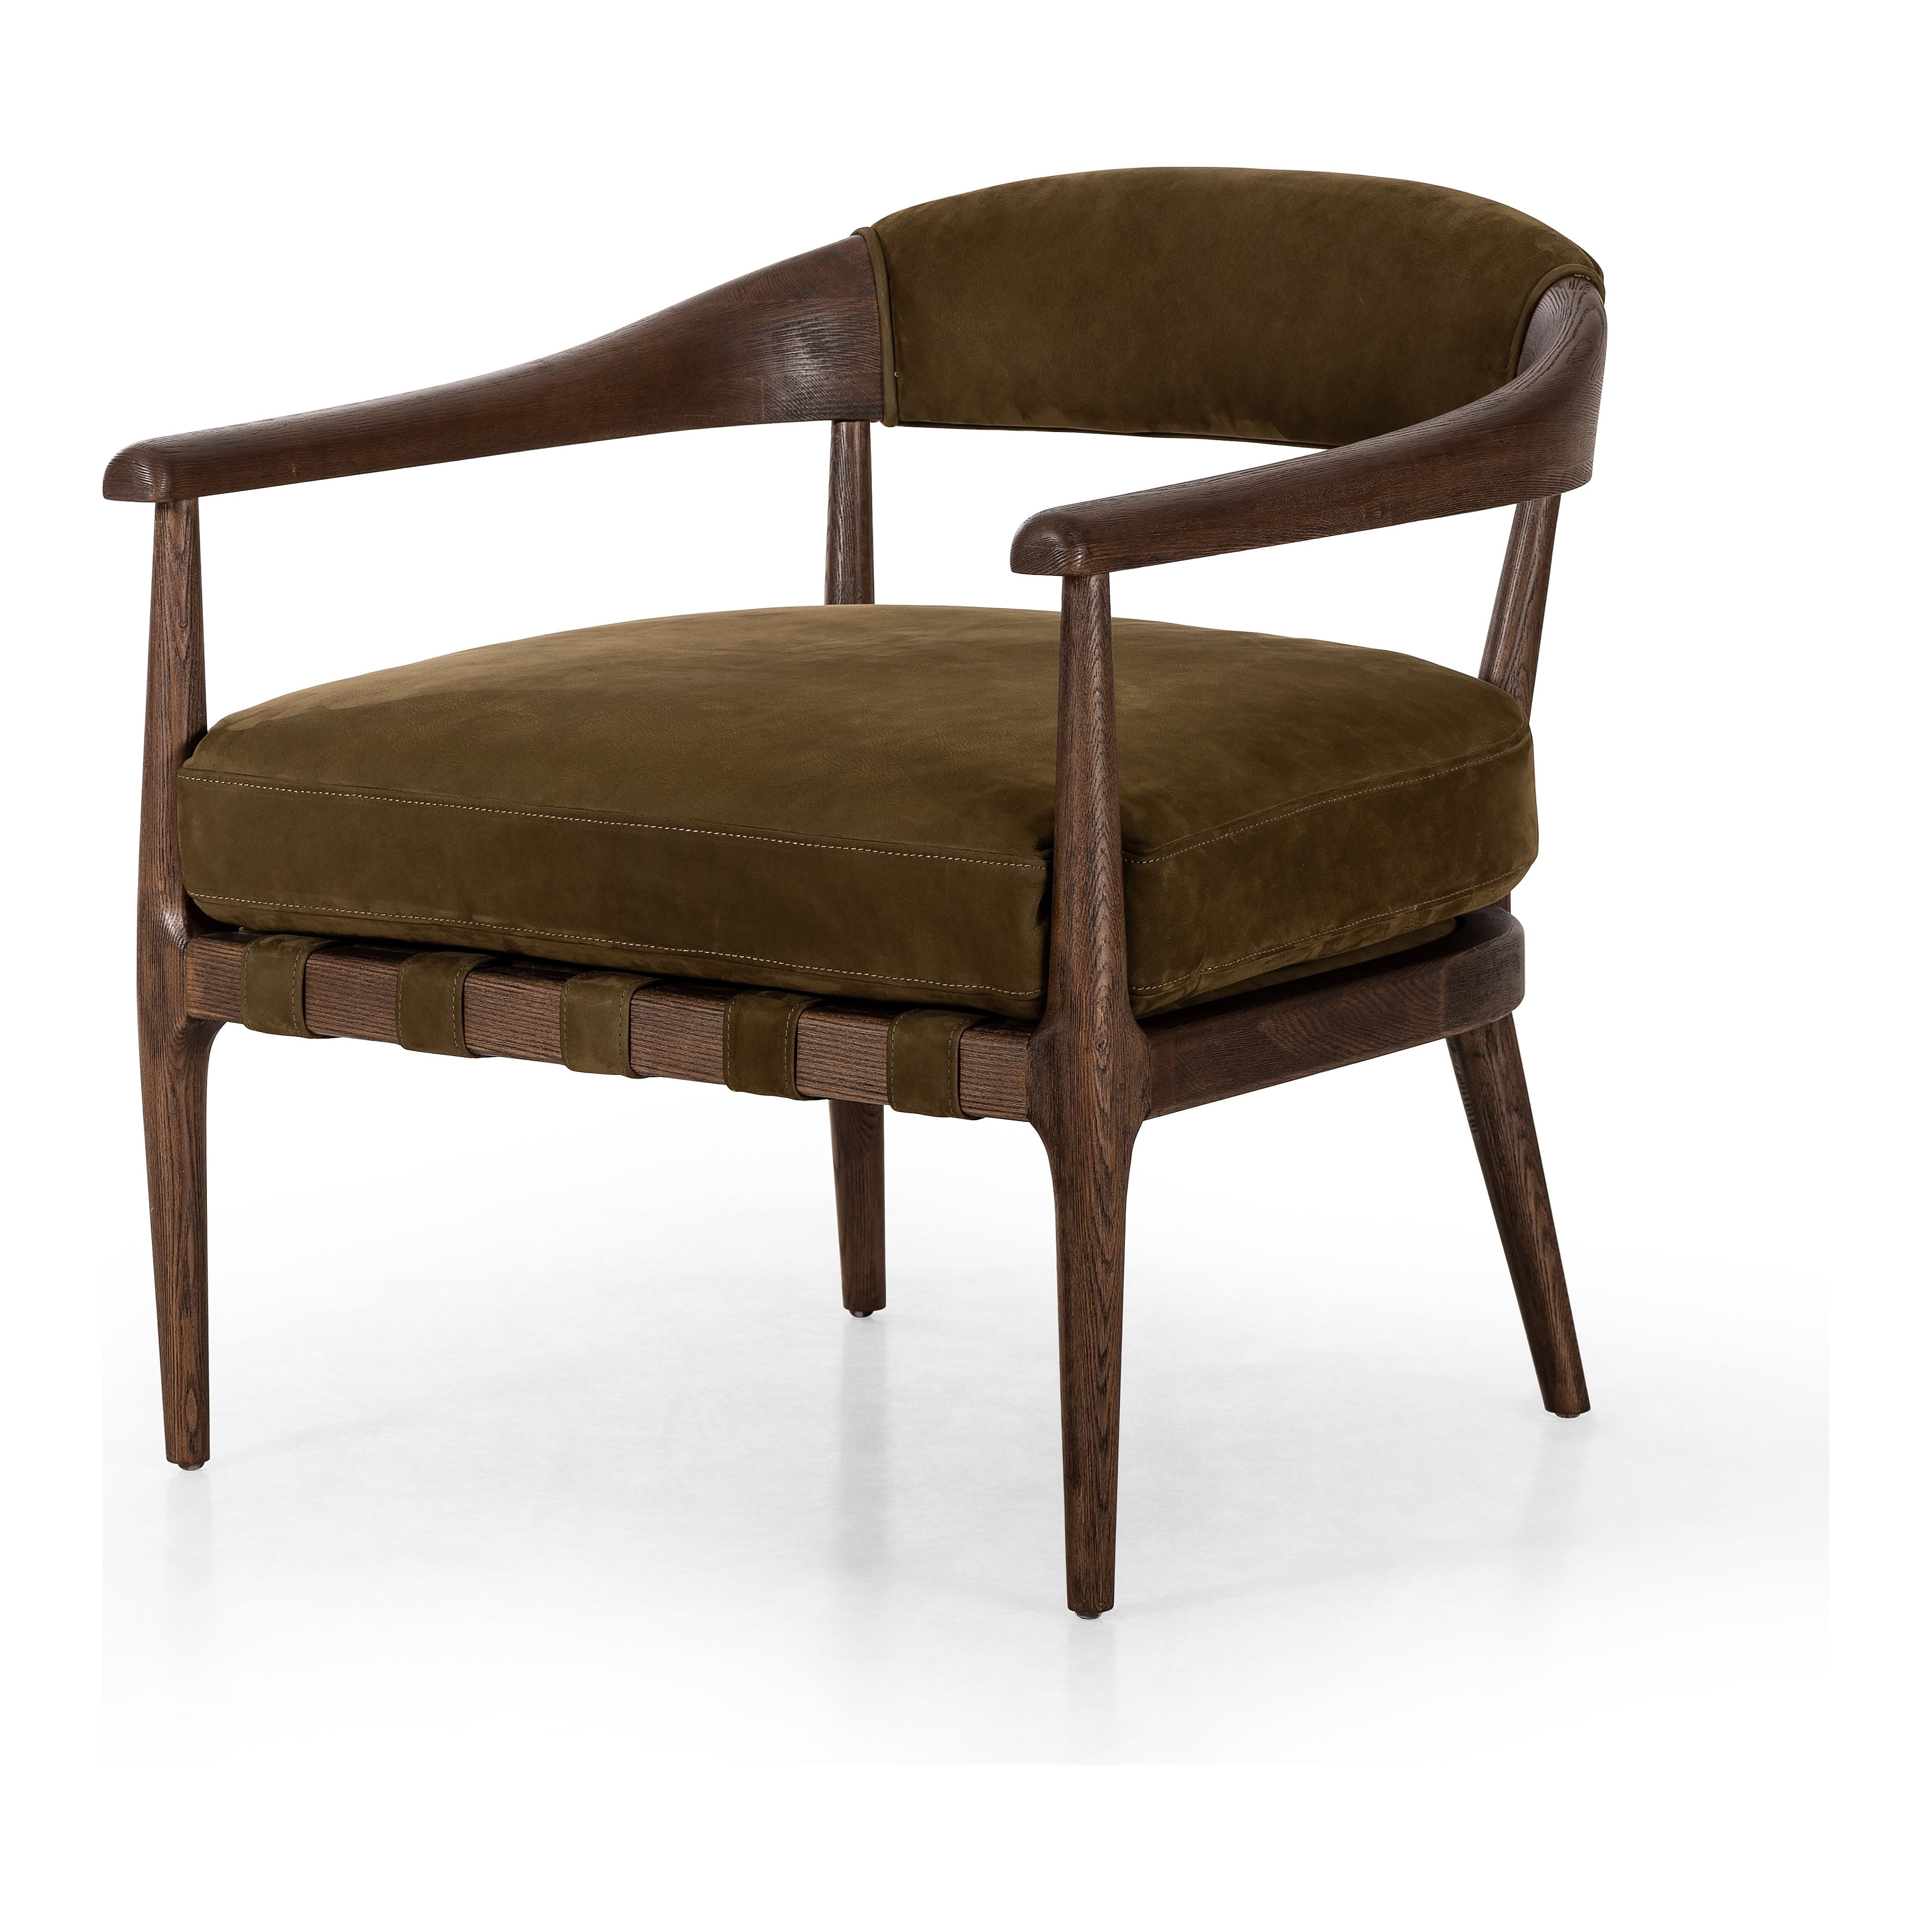 Safari styling is brought to modern speed on this vintage-inspired chair. Its solid wood frame features a webbed seating structure that brings a sink-in feel to the entire piece. The upholstered back, strap details and loose cushion are finished in a rich Italian-made leather with a soft, buttery feel and subtle highs and lows throughout the hide that bring movement to the entire piece. Amethyst Home provides interior design, new construction, custom furniture, and area rugs in the Laguna Beach metro area.